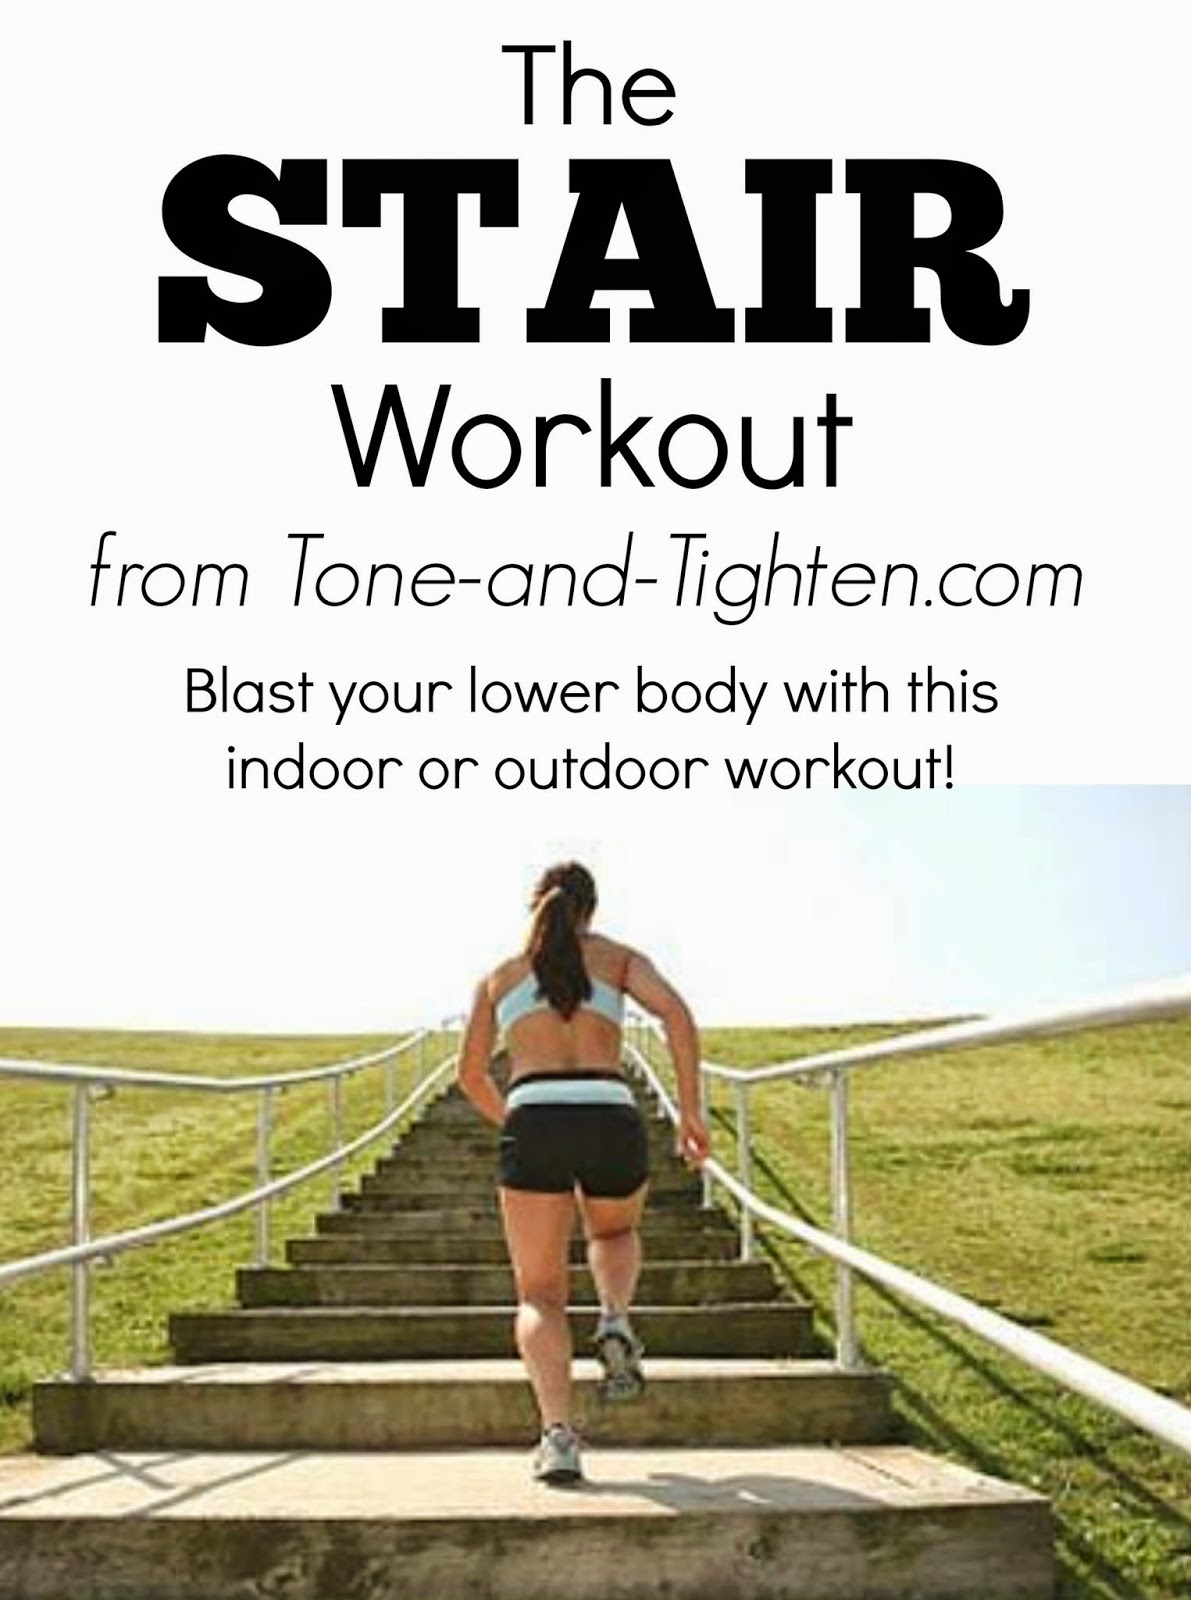 The Stair Workout- make those legs burn!